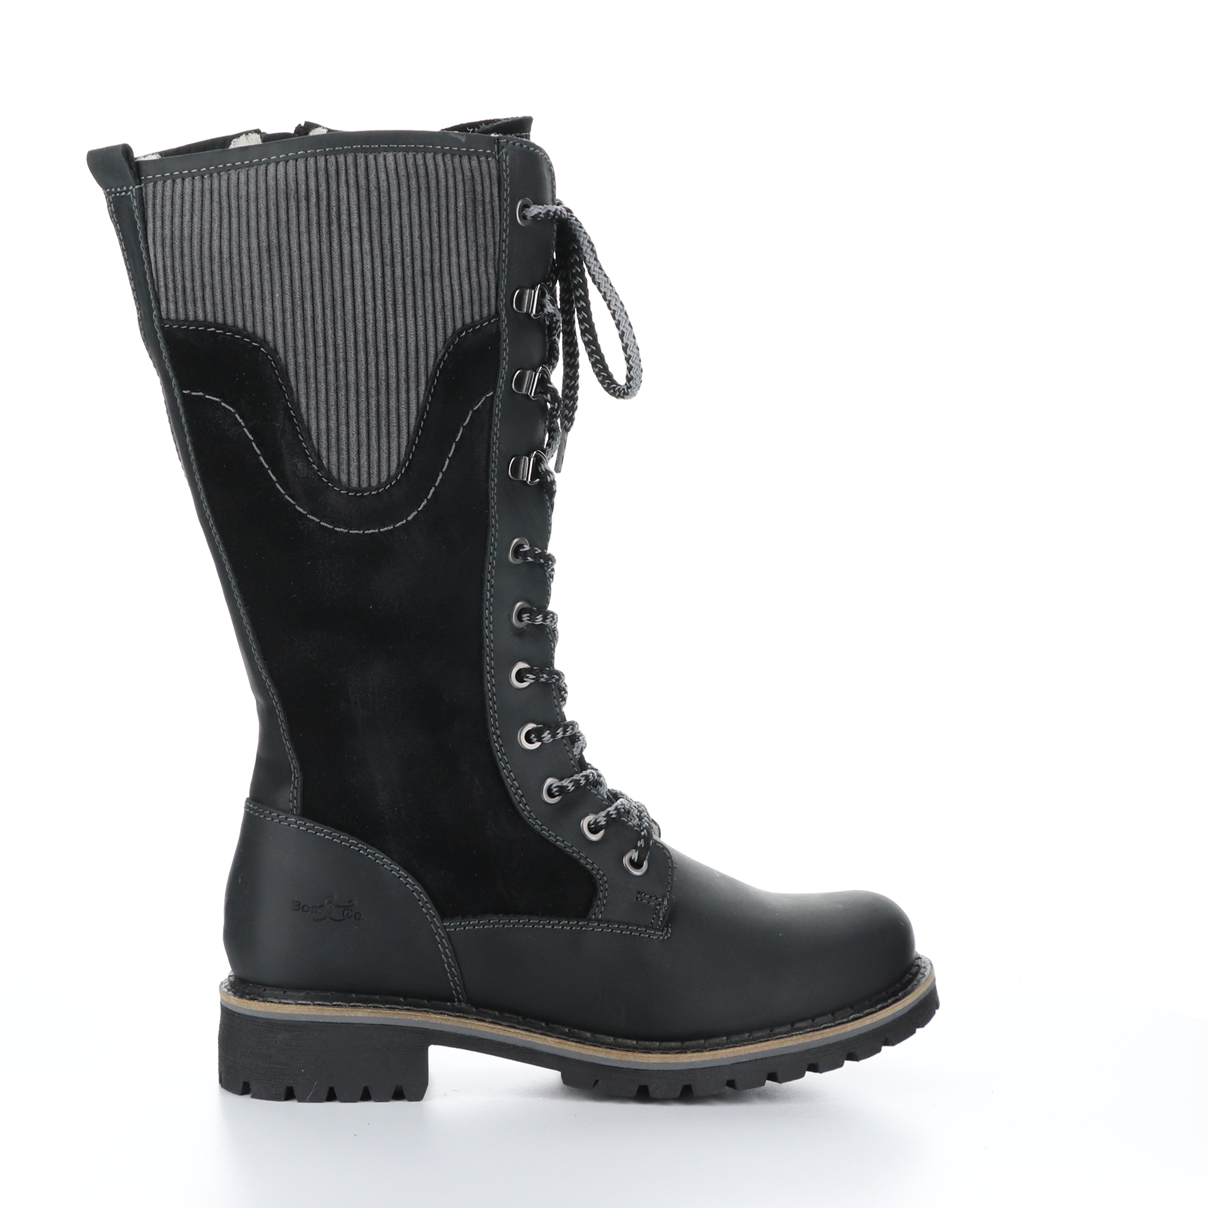 Outer side view of the bos & co harrsion boot in the color black/grey. This boot is calf-height. It has a lace up front and panels of suede leather, burnished leather, and corduroy. 